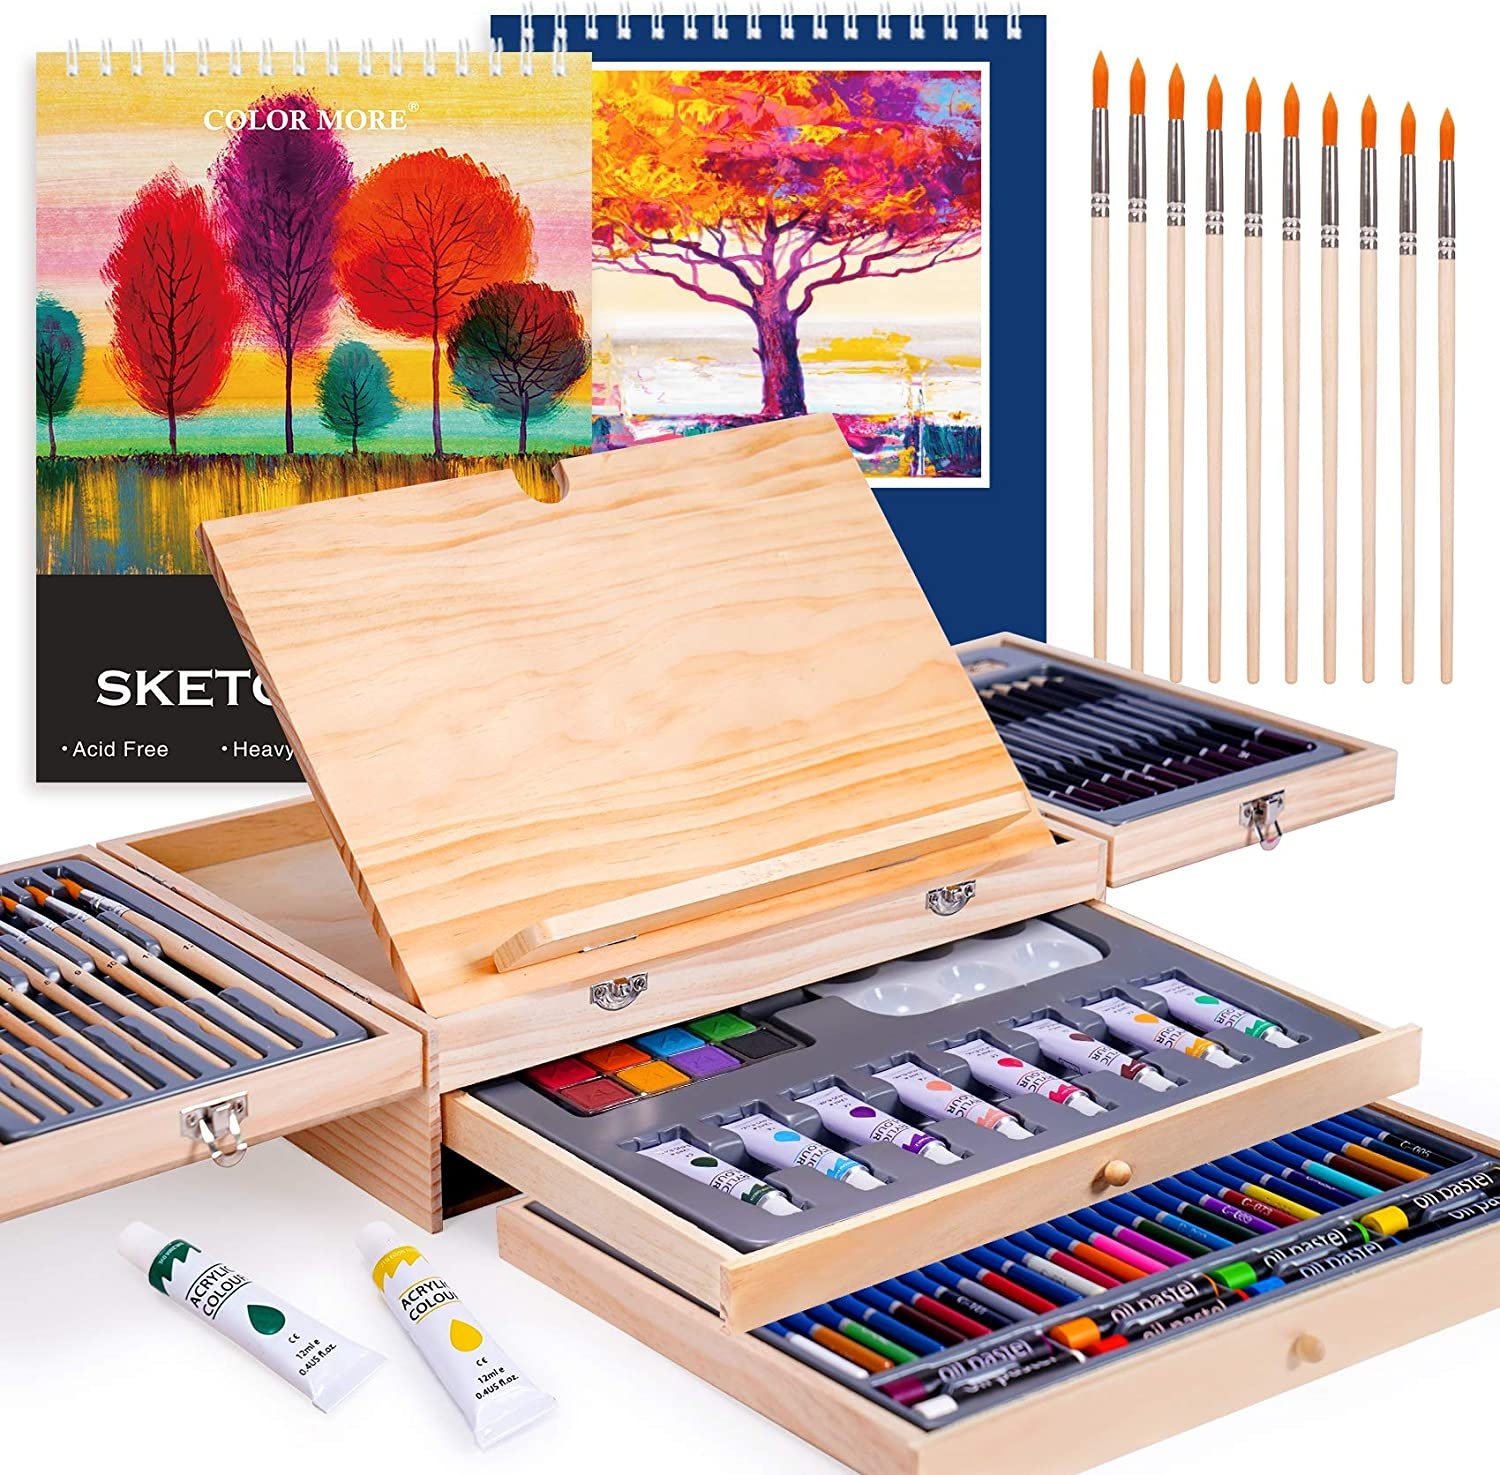 Clearance! Mikilon Art Supplies, 86 Pcs Art Set Crafts Drawing Painting  Coloring Supplies Kit, Creative Graduation Gift Box for Artist Beginners  Kids